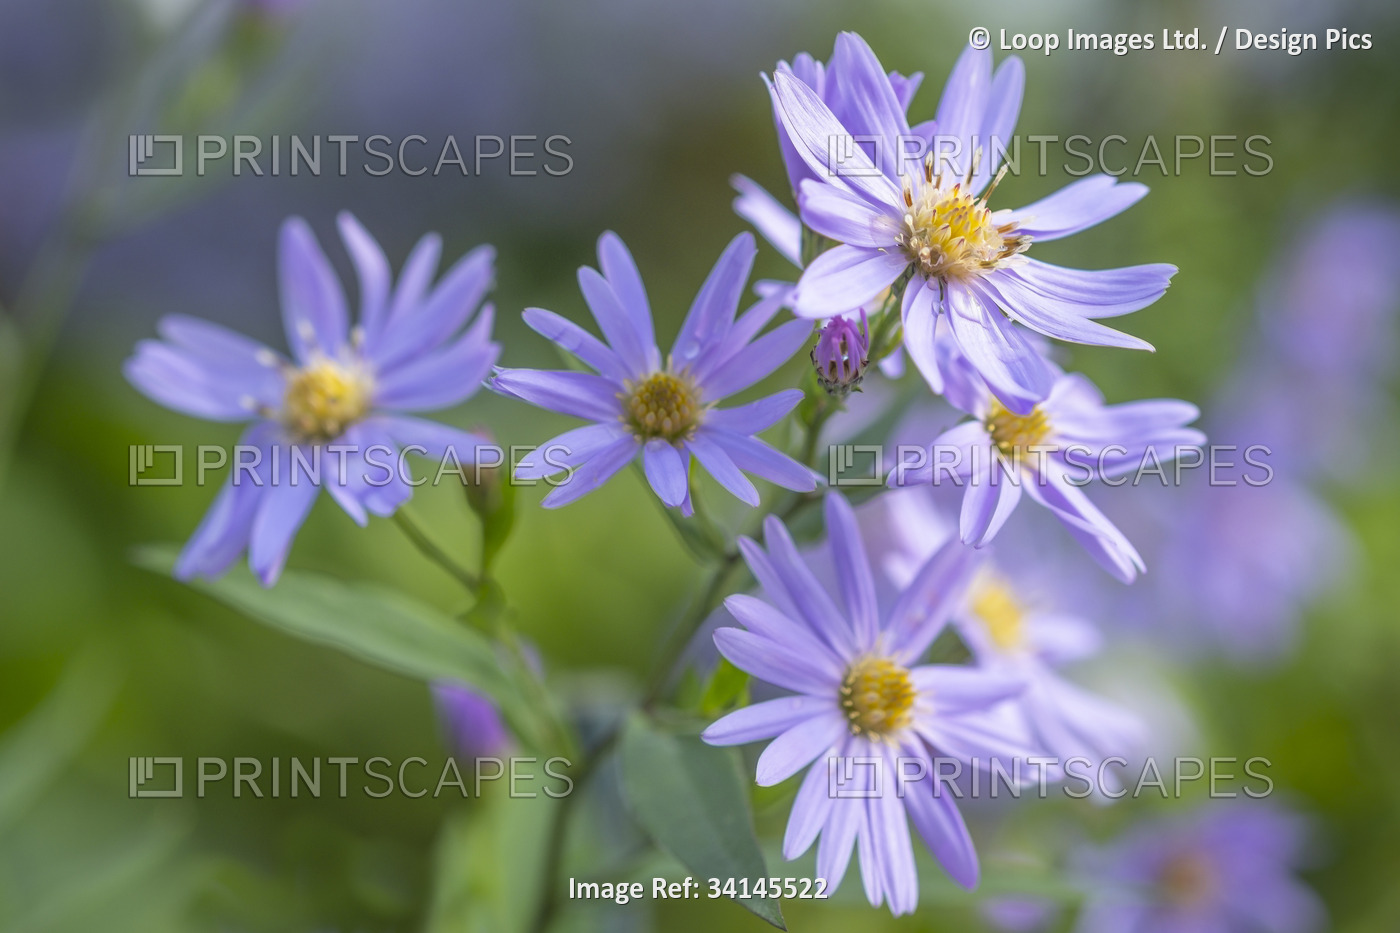 Autumn aster flowers of Aster Cordifolius Little Carlow.